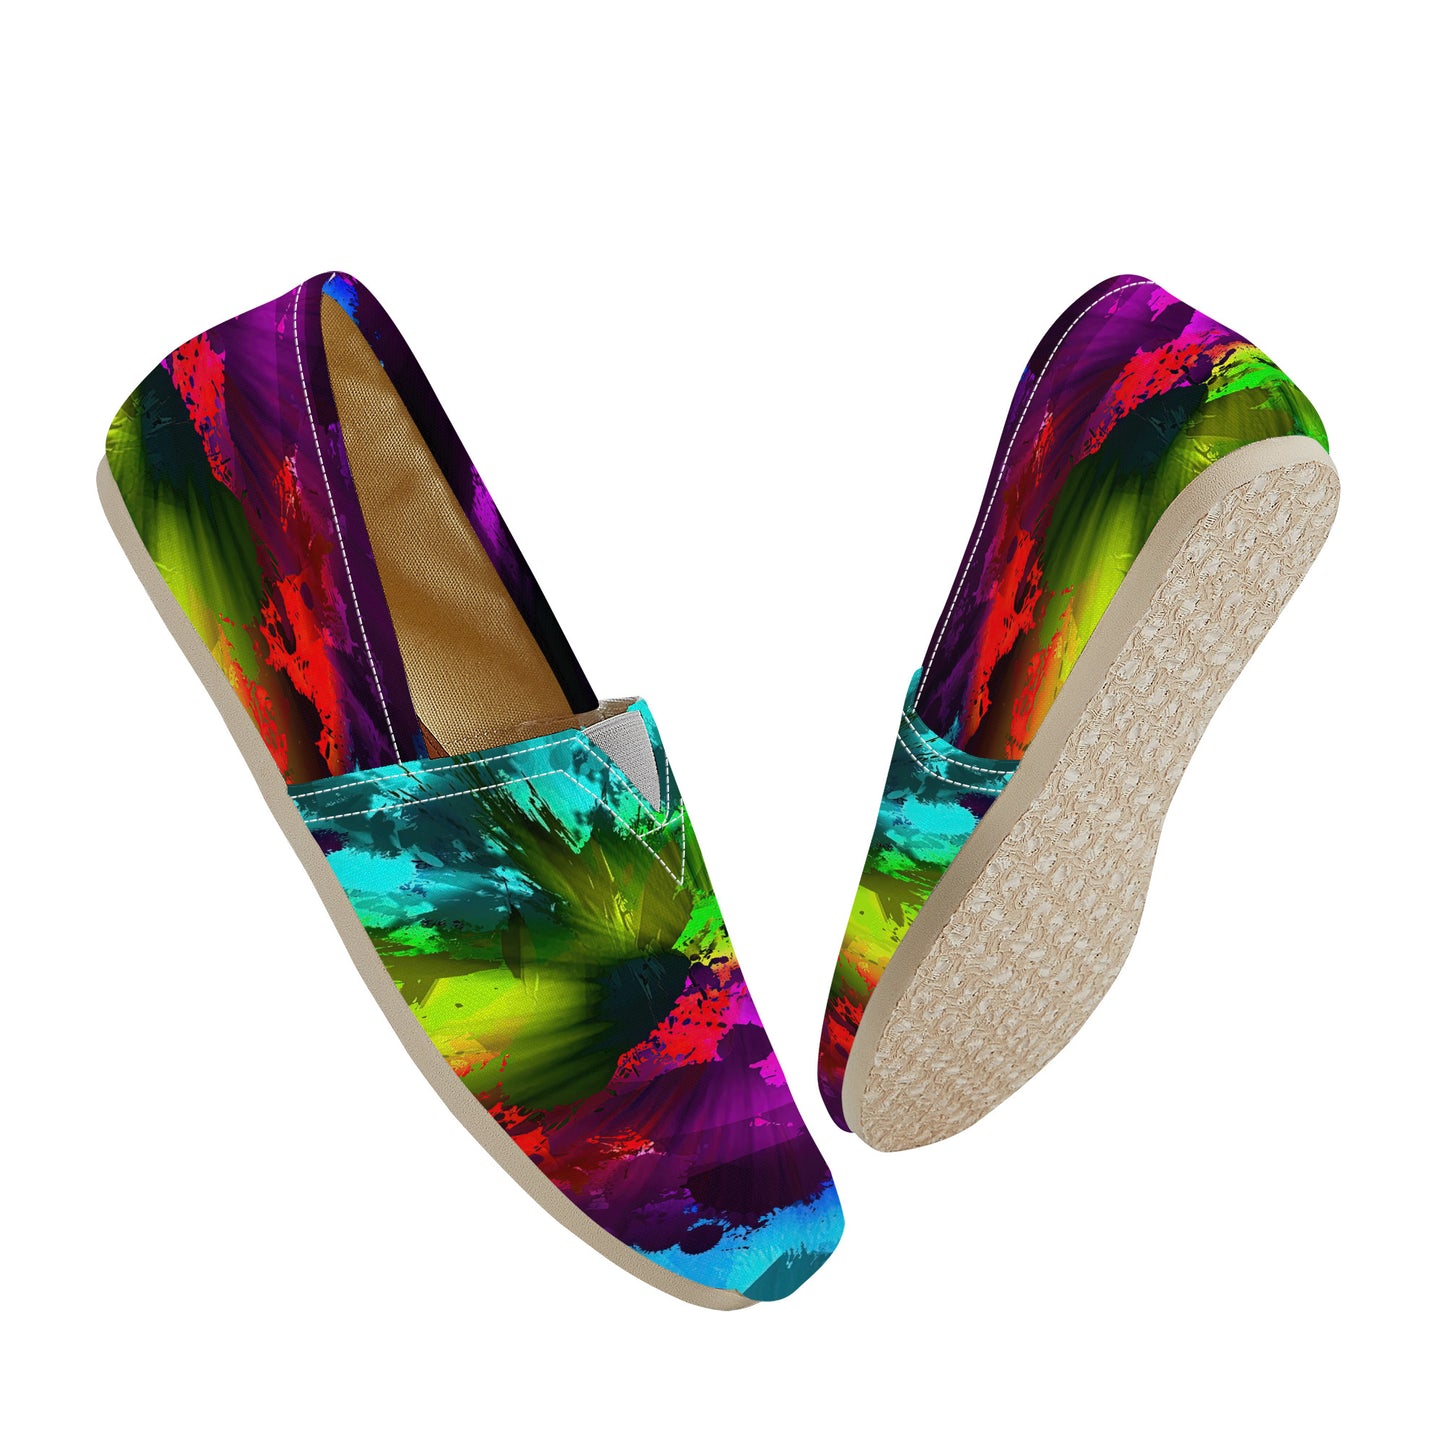 Color Implosion Casual Flat Driving Shoe